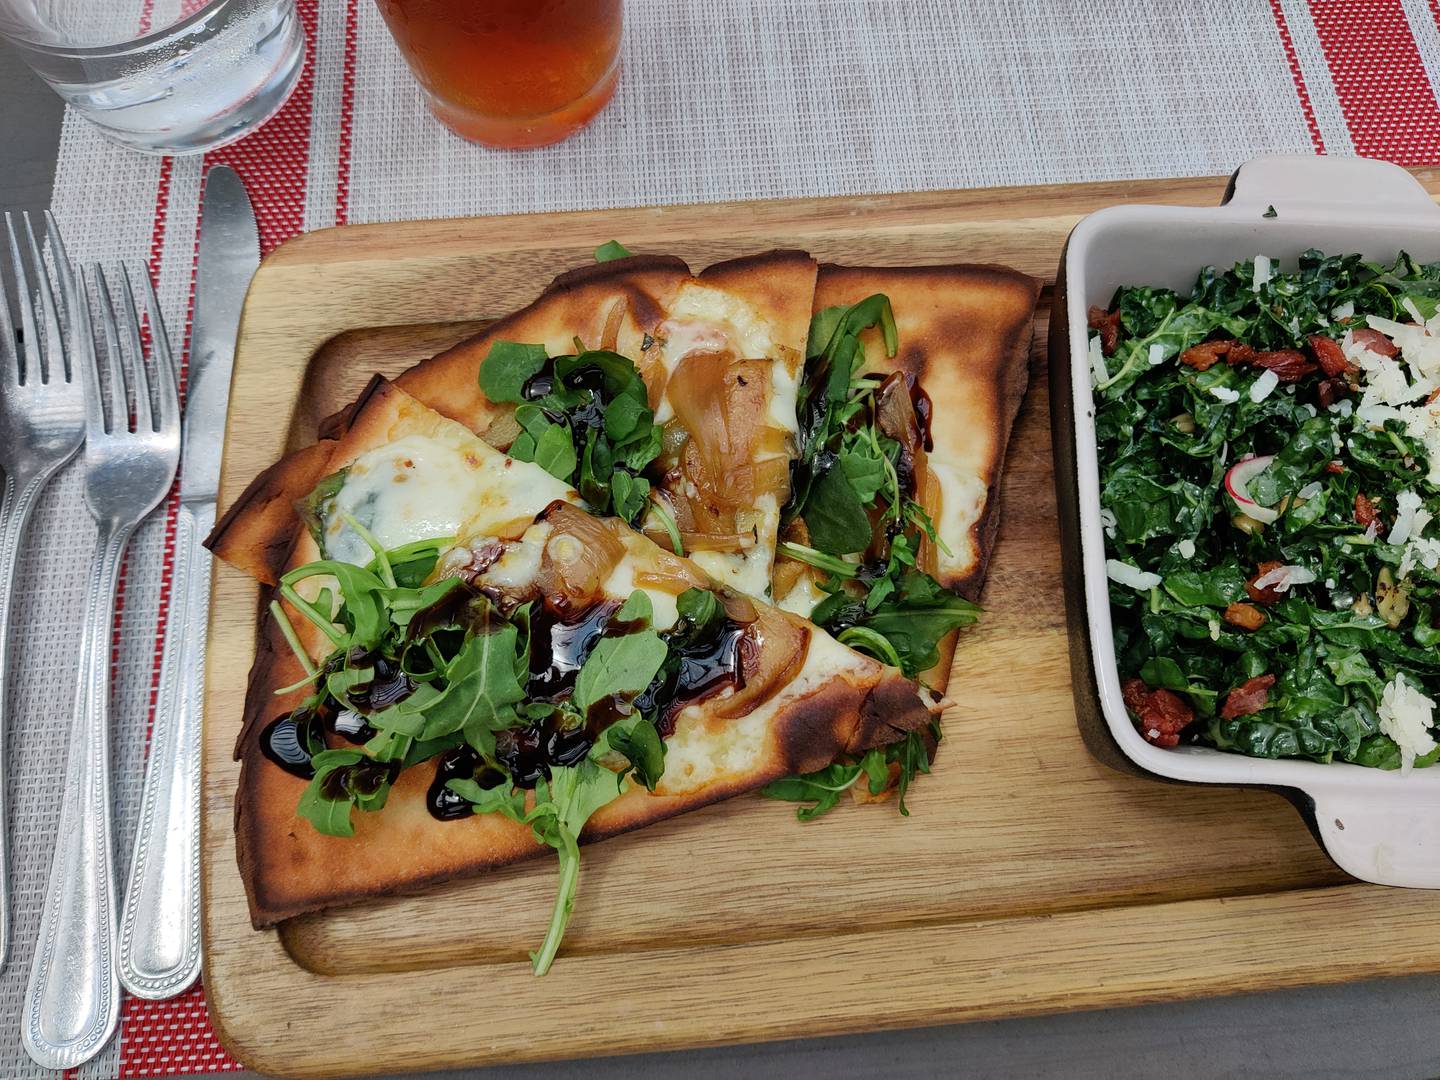 Gluten-free, wood-fired pizza and a side salad in the luncheon special at Gia Mia in Geneva.